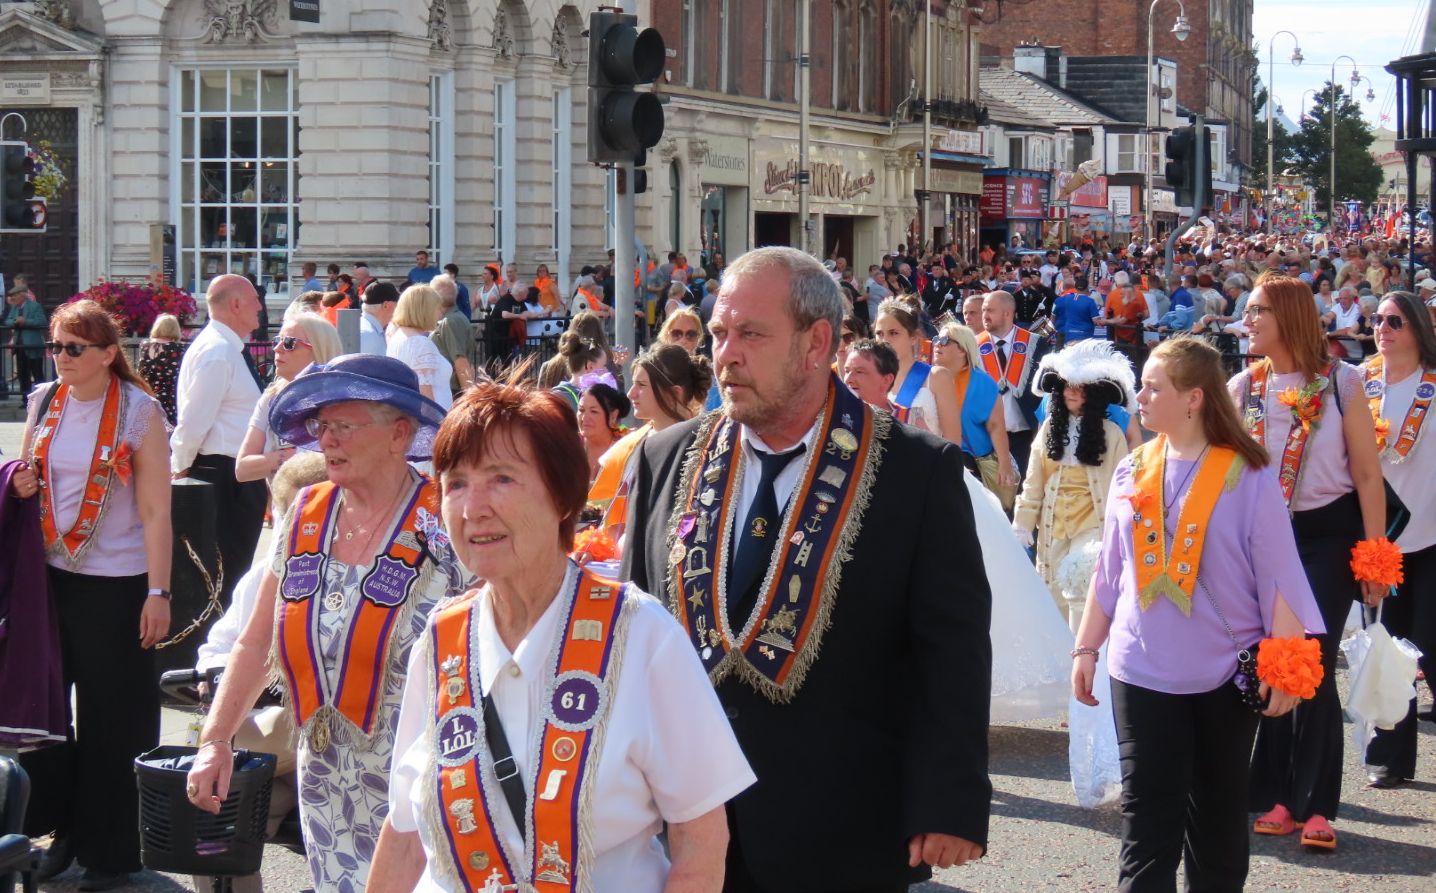 The Orange Lodge Parade in Southport. Photo by Andrew Brown Stand Up For Southport